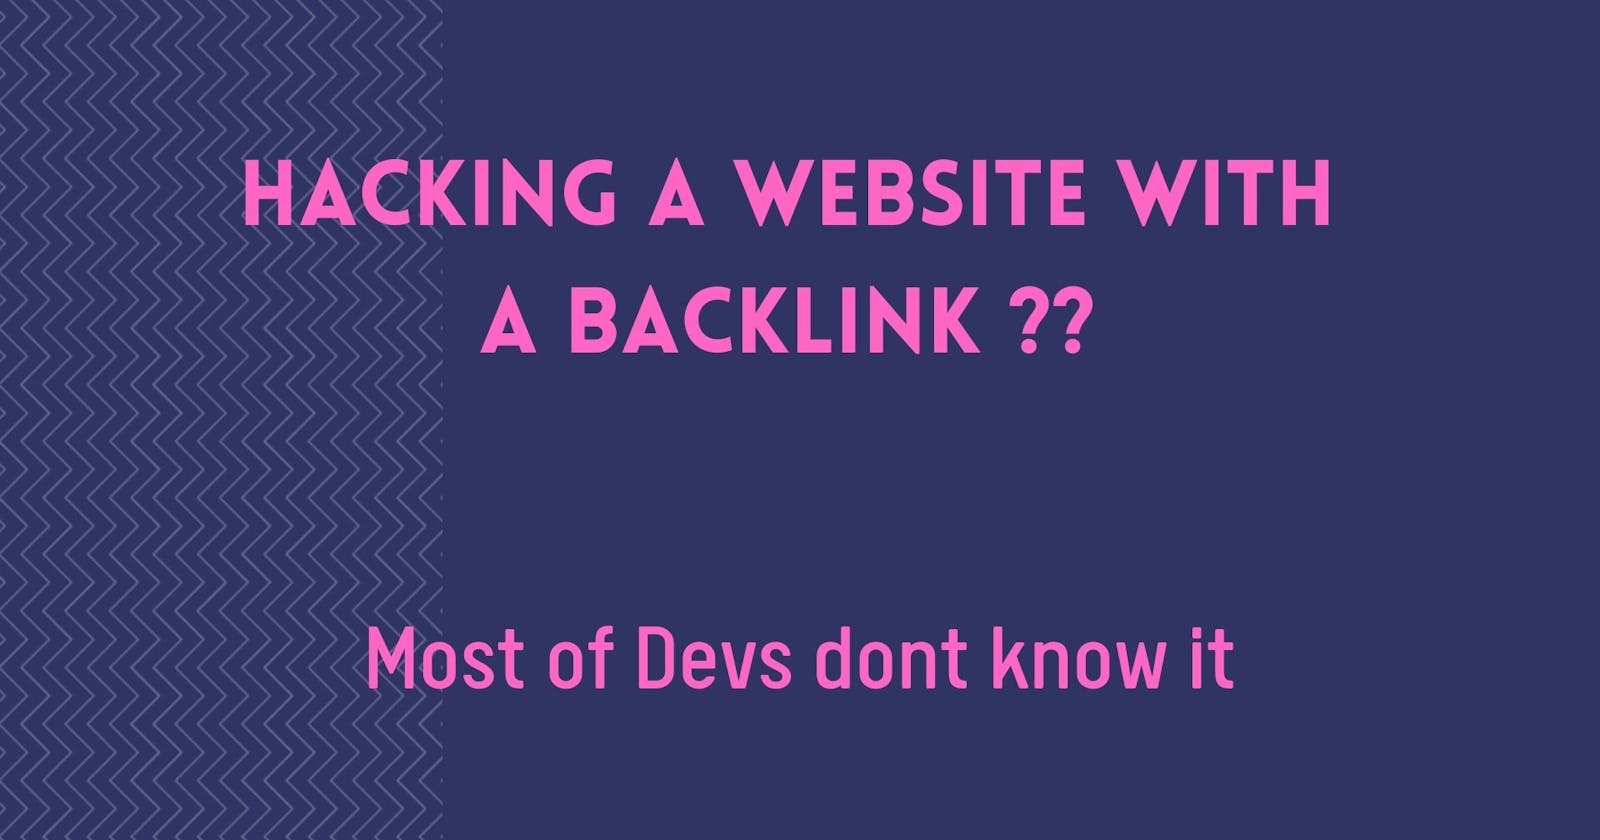 Hacking a Website with just a backlink